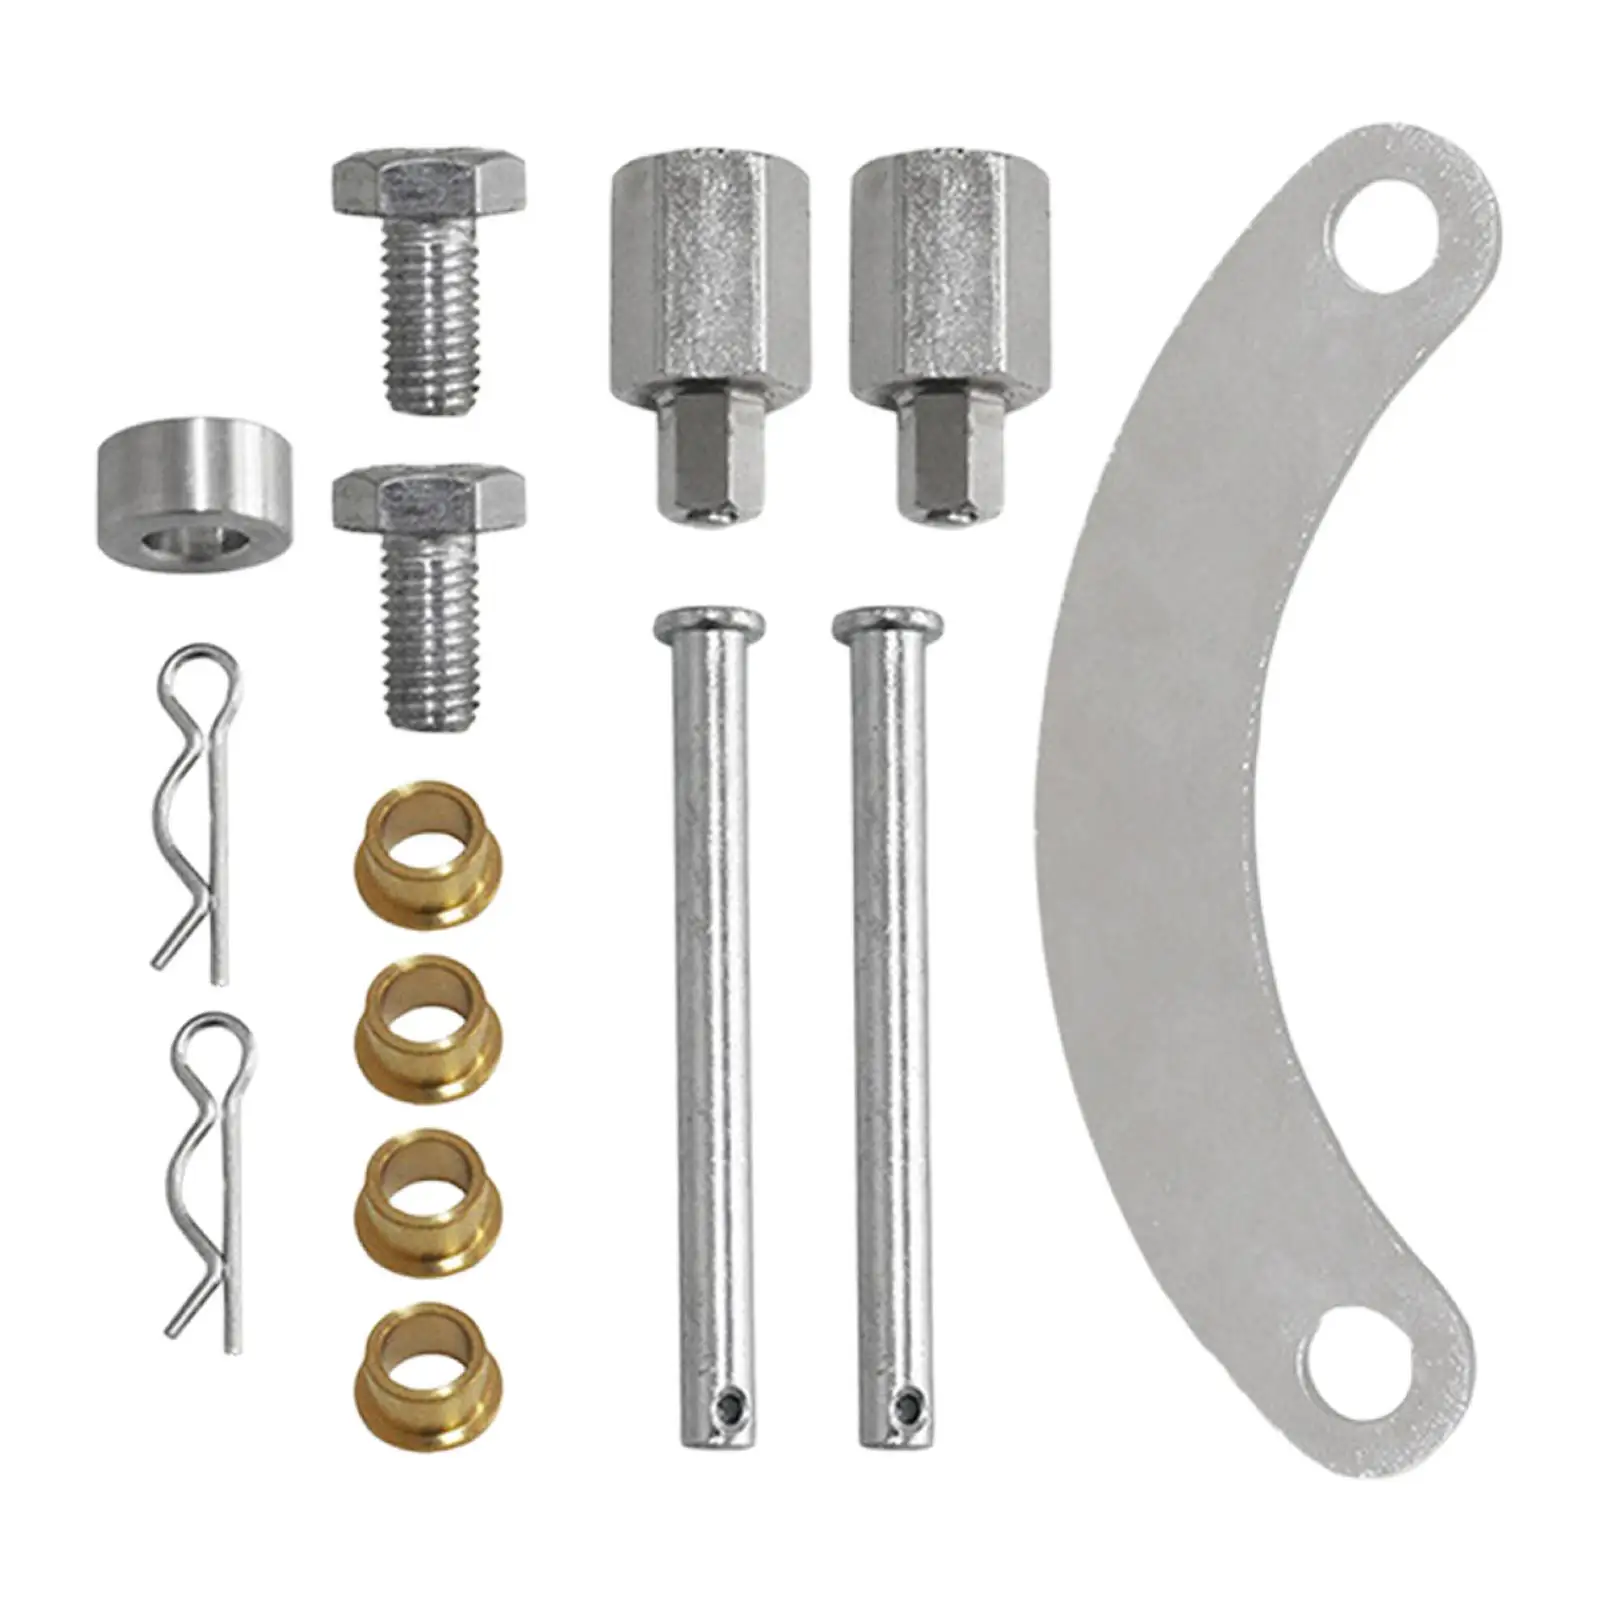 cam Gear Lock set Direct Replaces for Subaru WRX Sti Fxt Lgt Mounting Hardware Durable Easy to Install Spare Parts